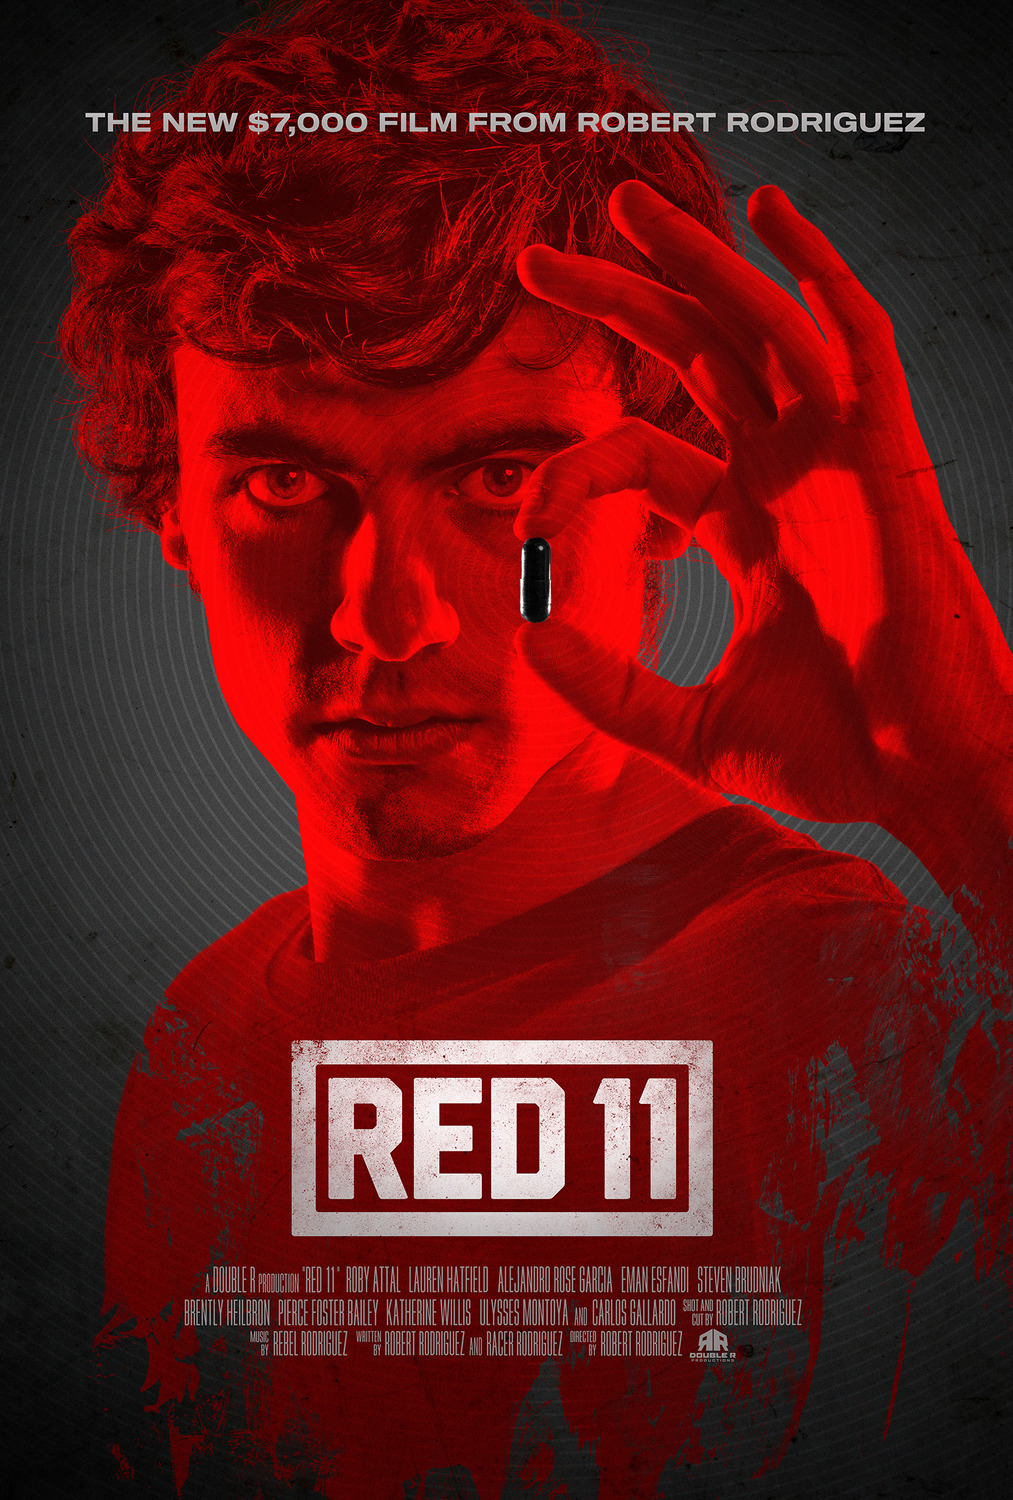 Extra Large Movie Poster Image for Red 11 